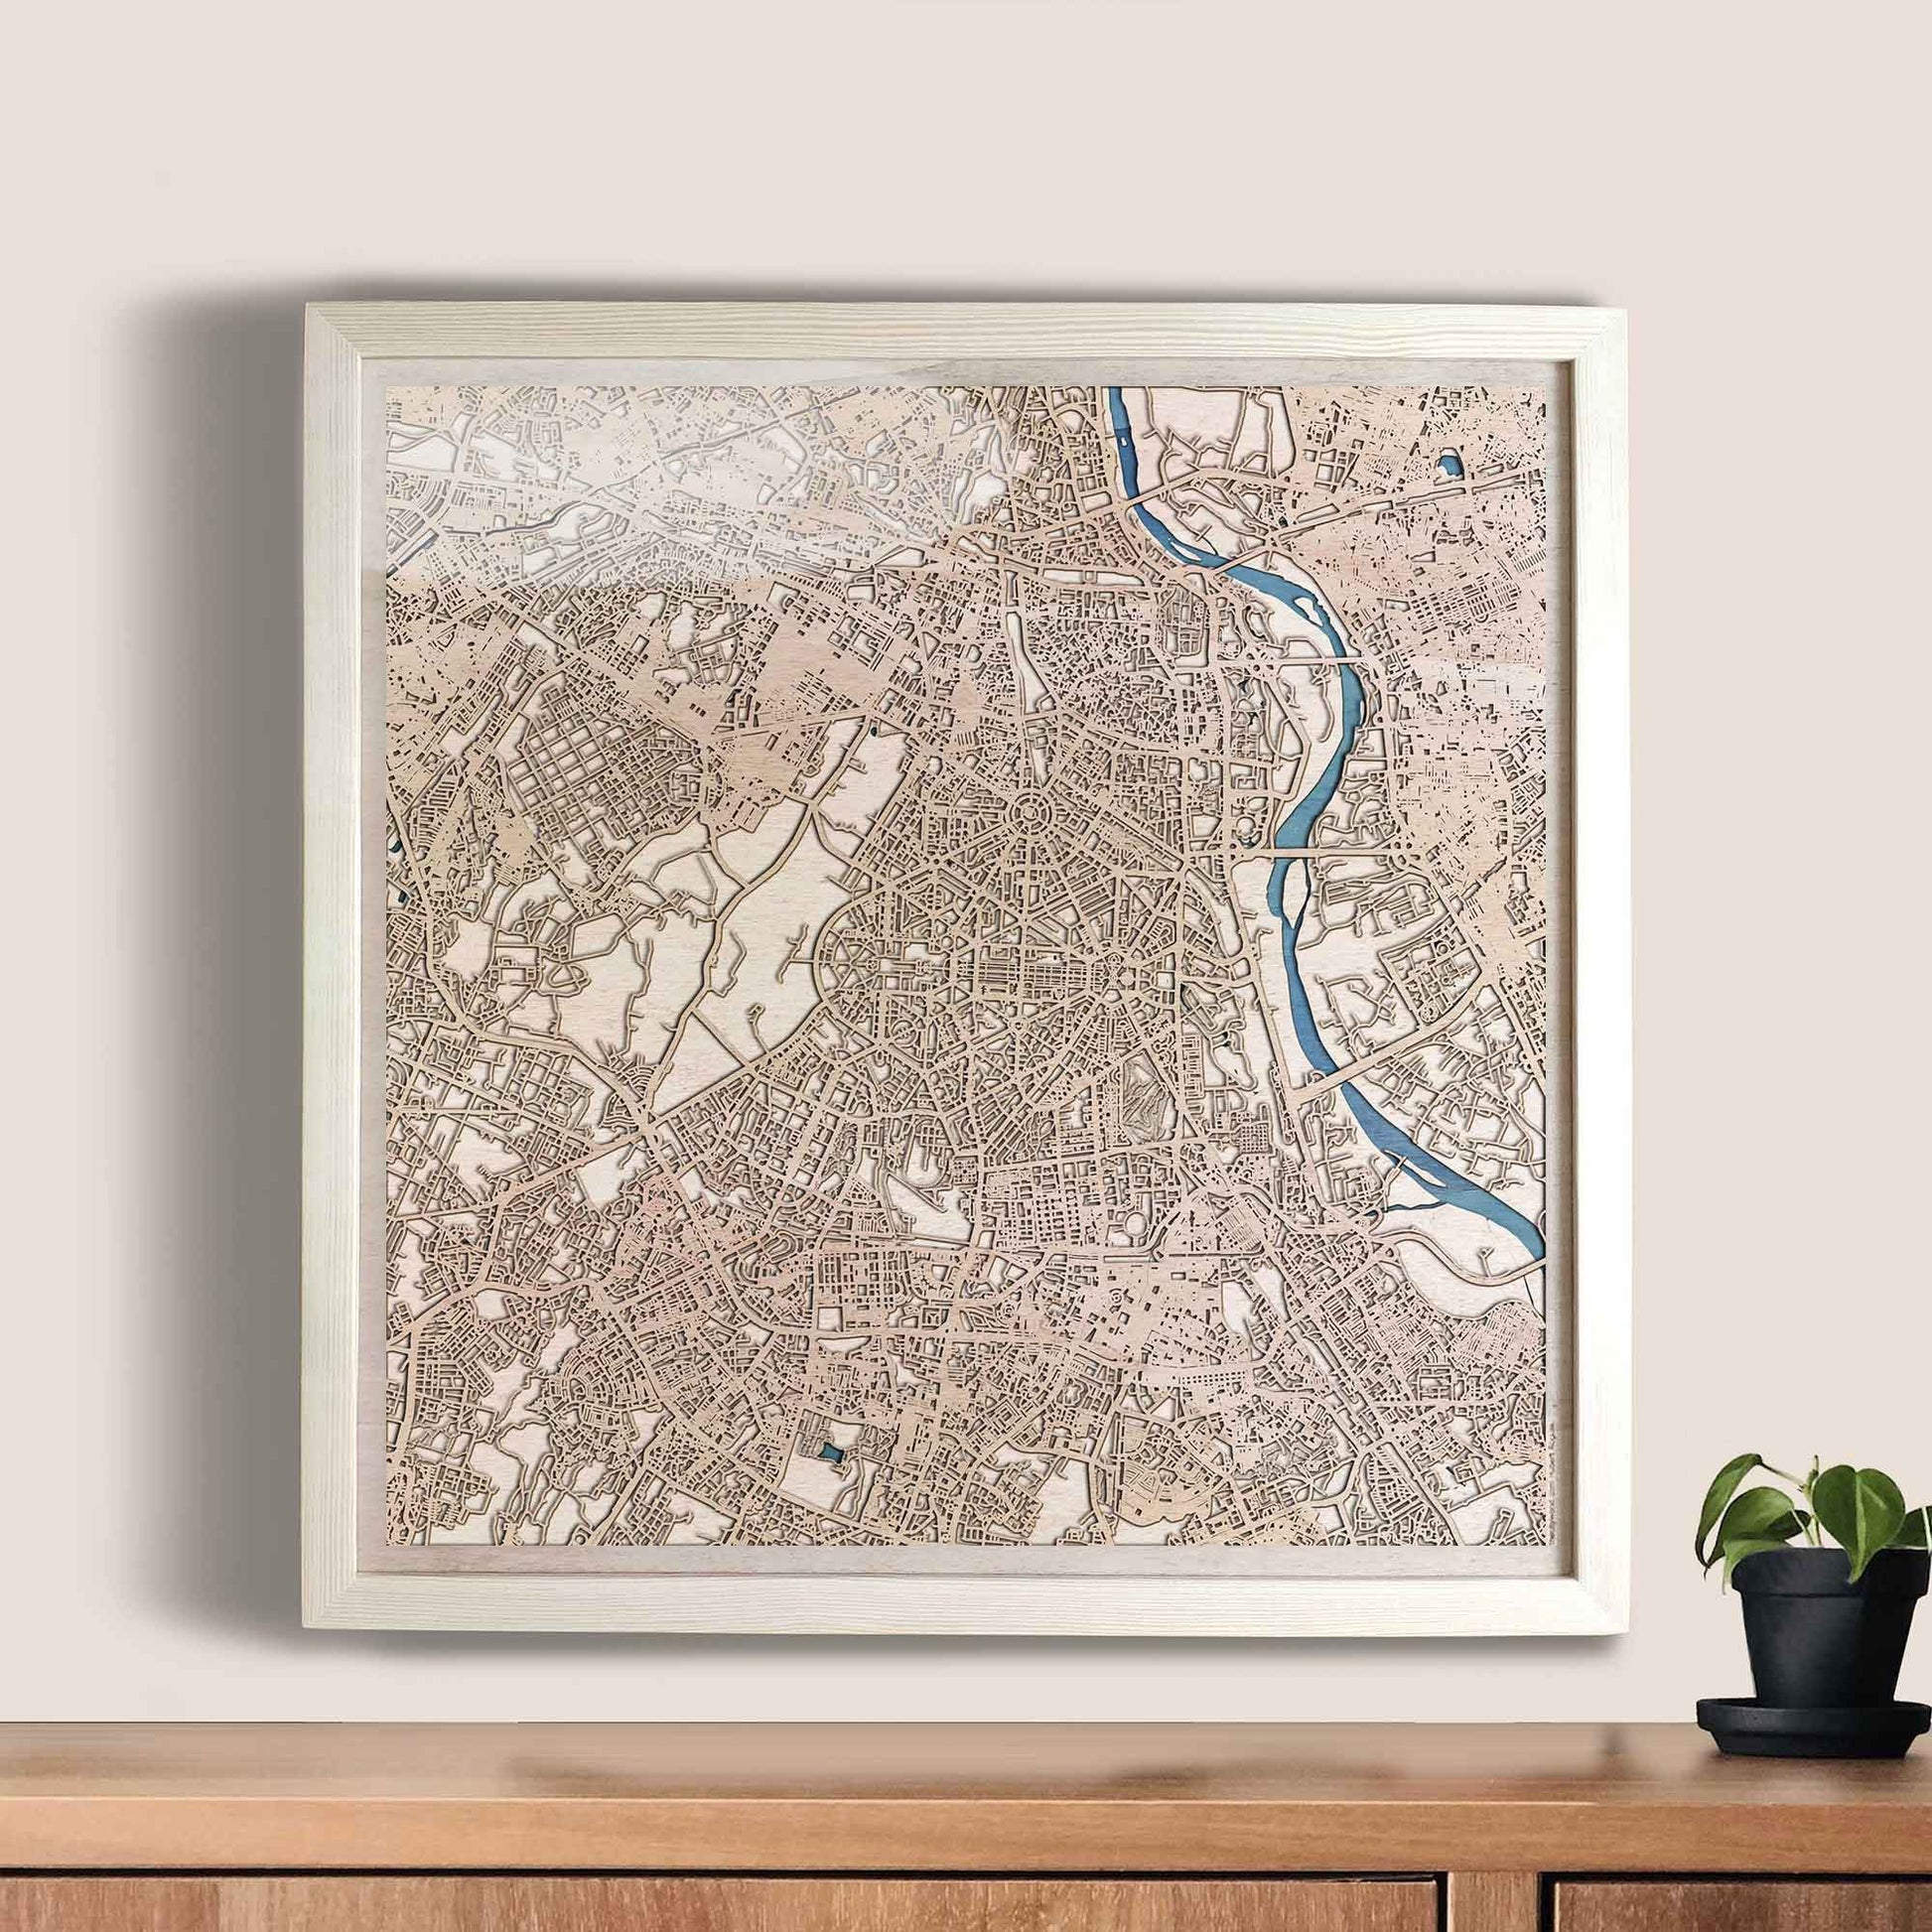 New Delhi Wooden Map by CityWood - Custom Wood Map Art - Unique Laser Cut Engraved - Anniversary Gift